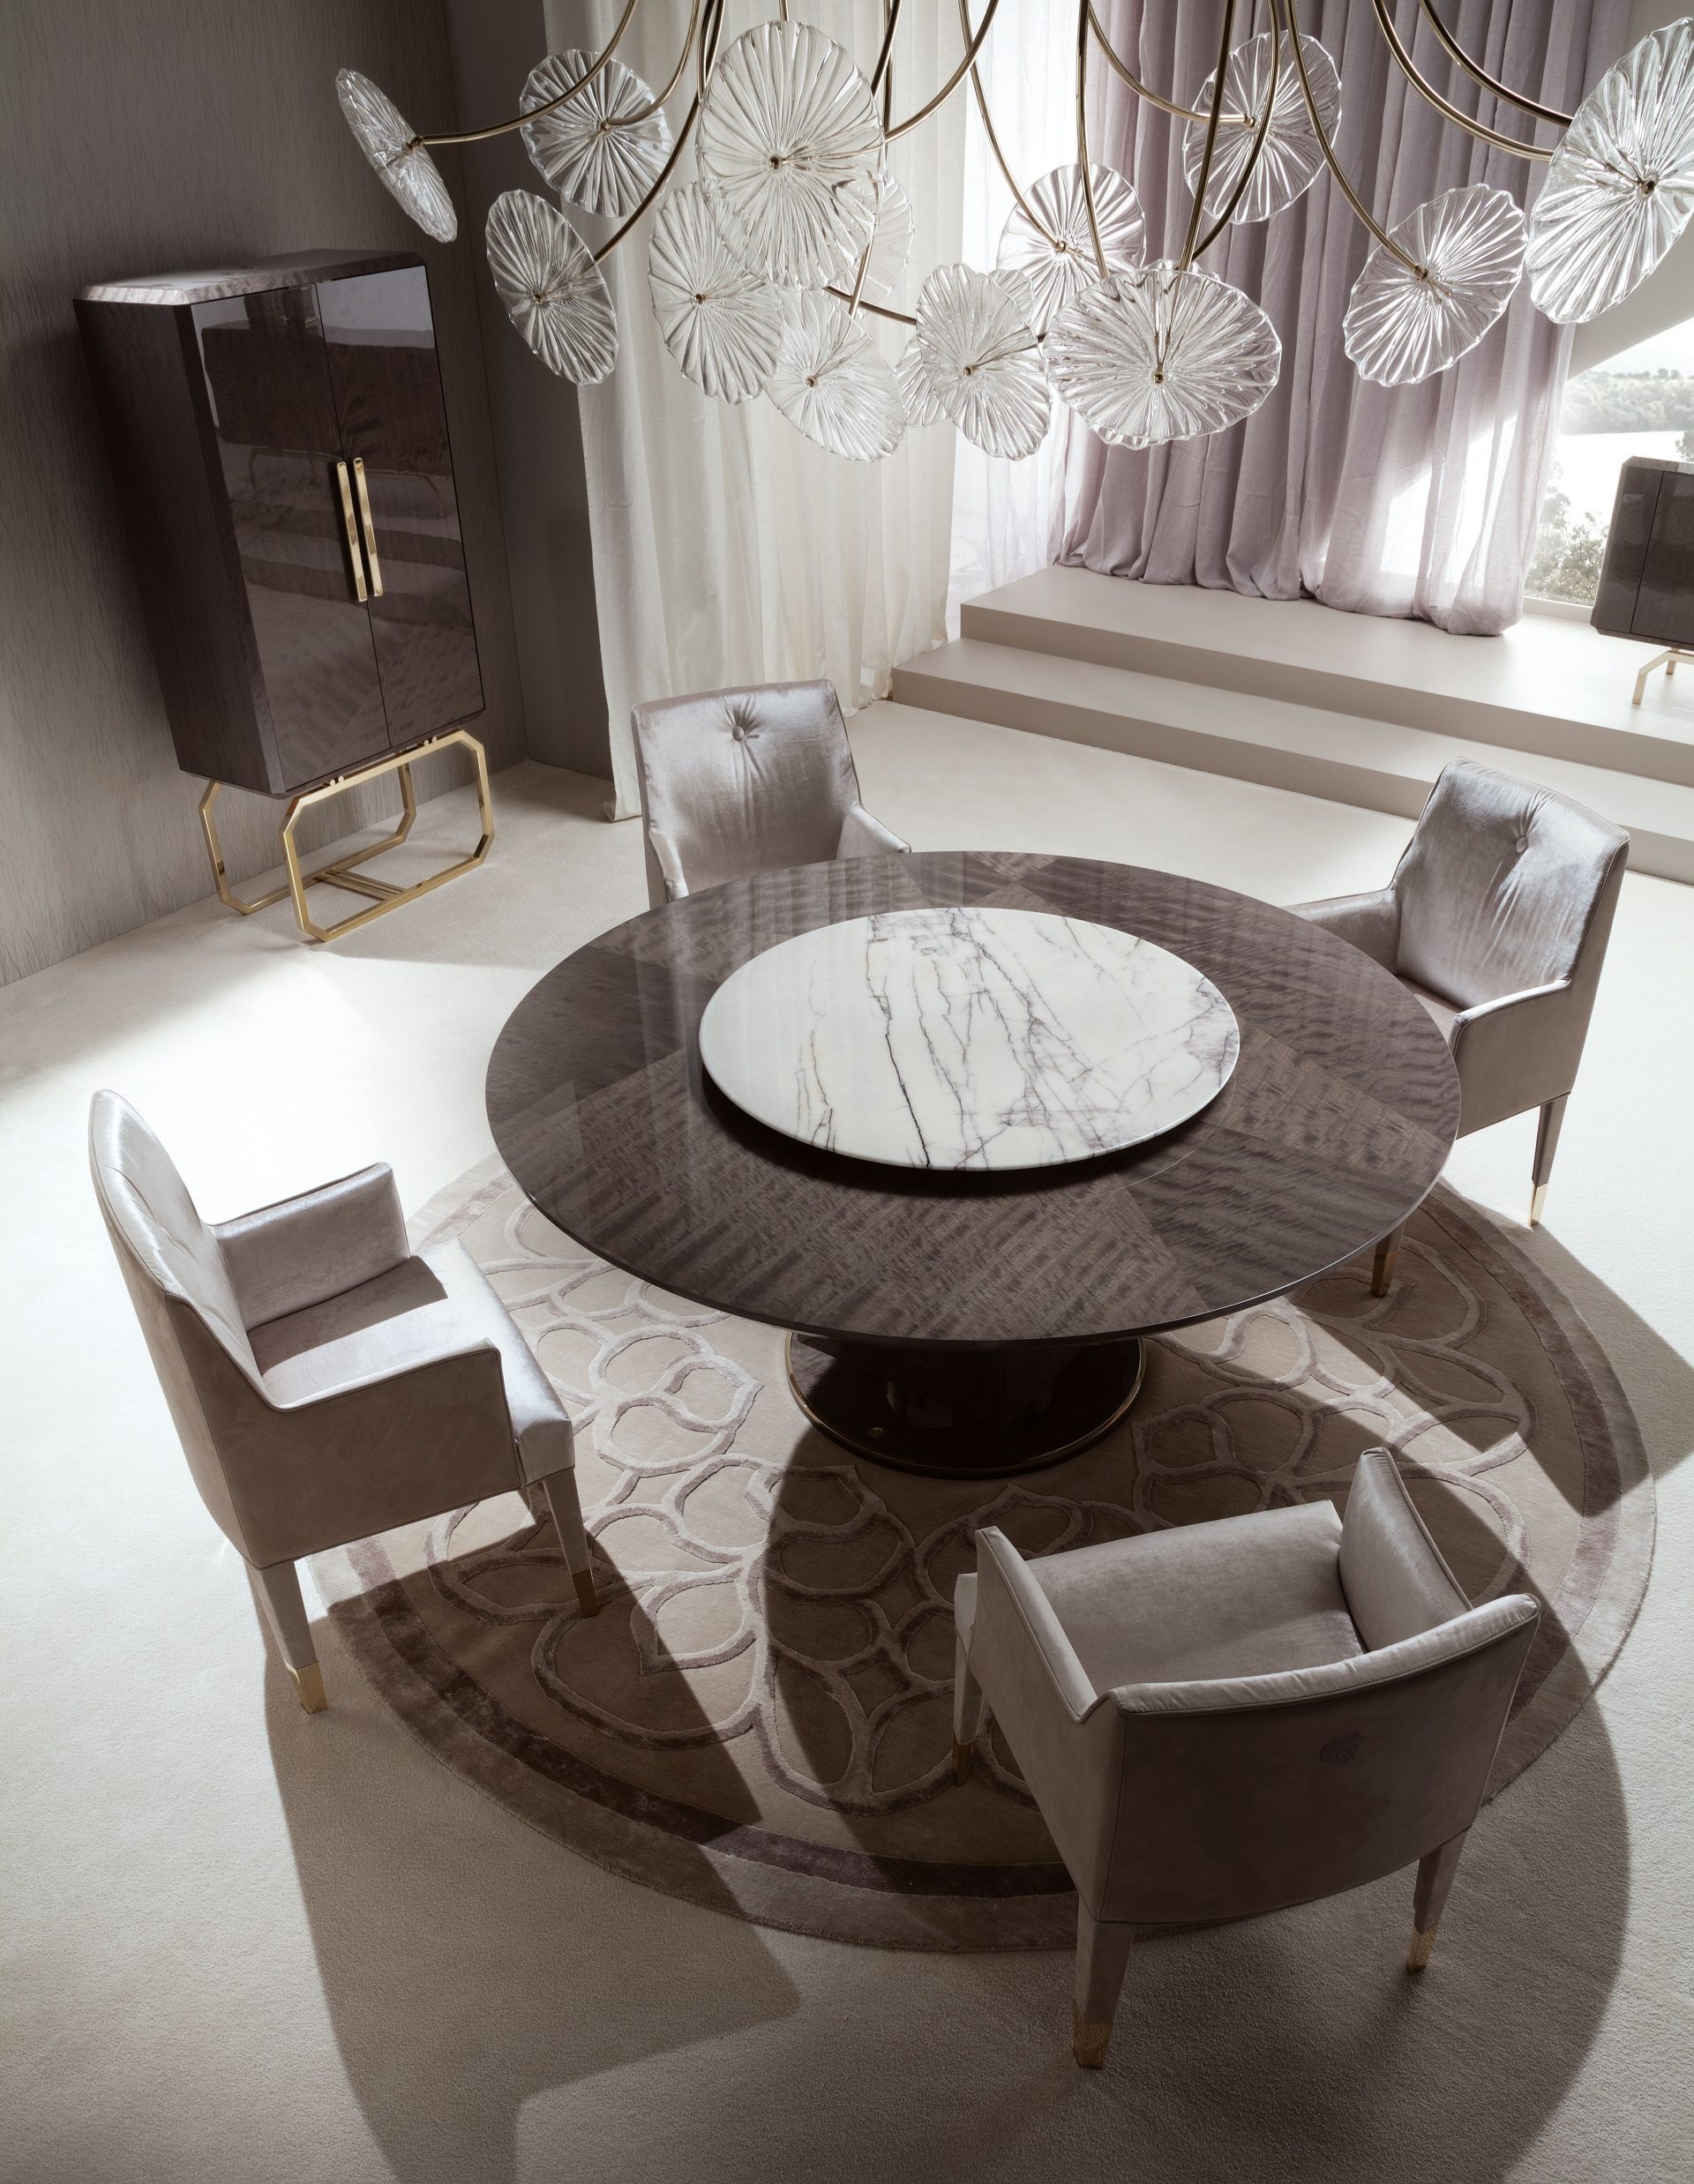 Infinity Round Dining Table